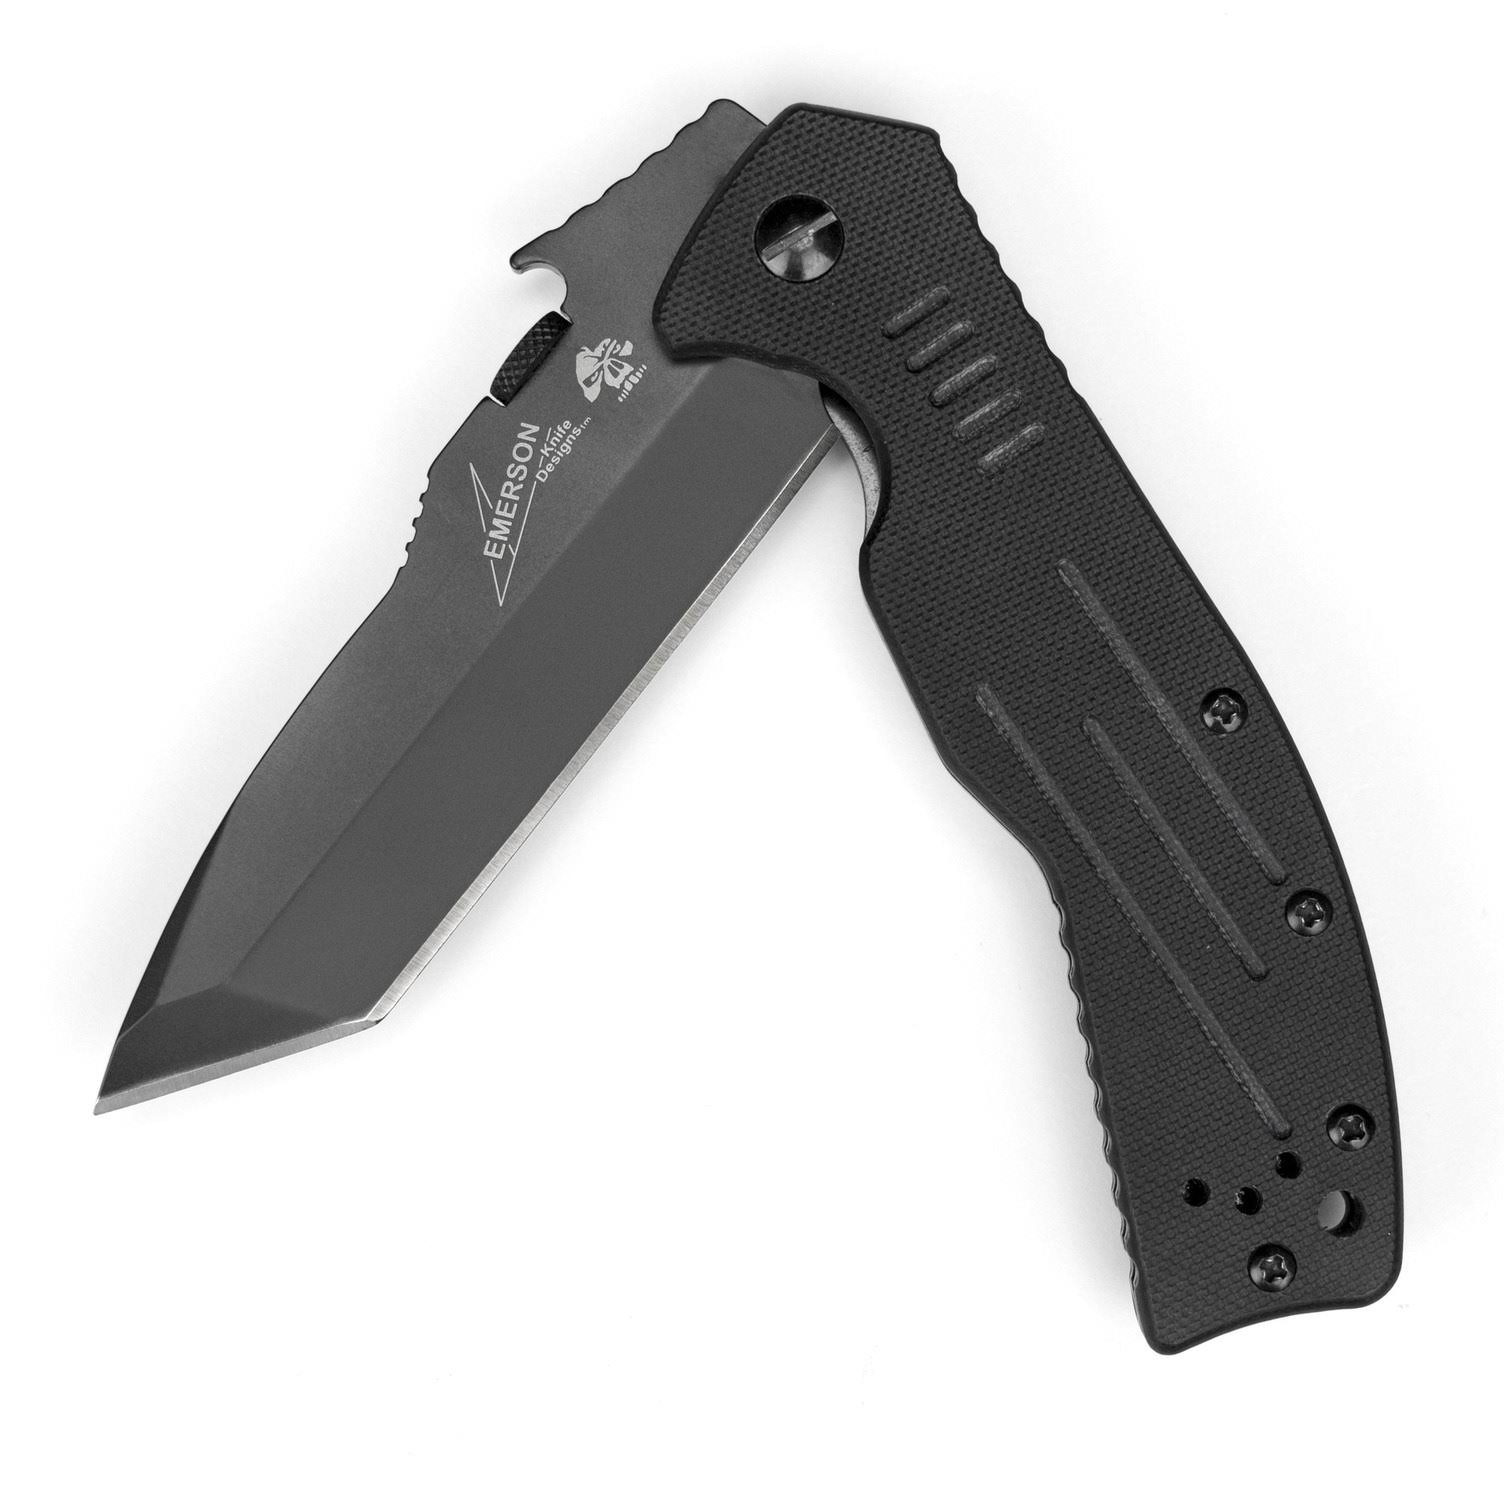 Kershaw 6044TBLK Emerson Cqc-8k Tactical Folding Knife - Tanto Point